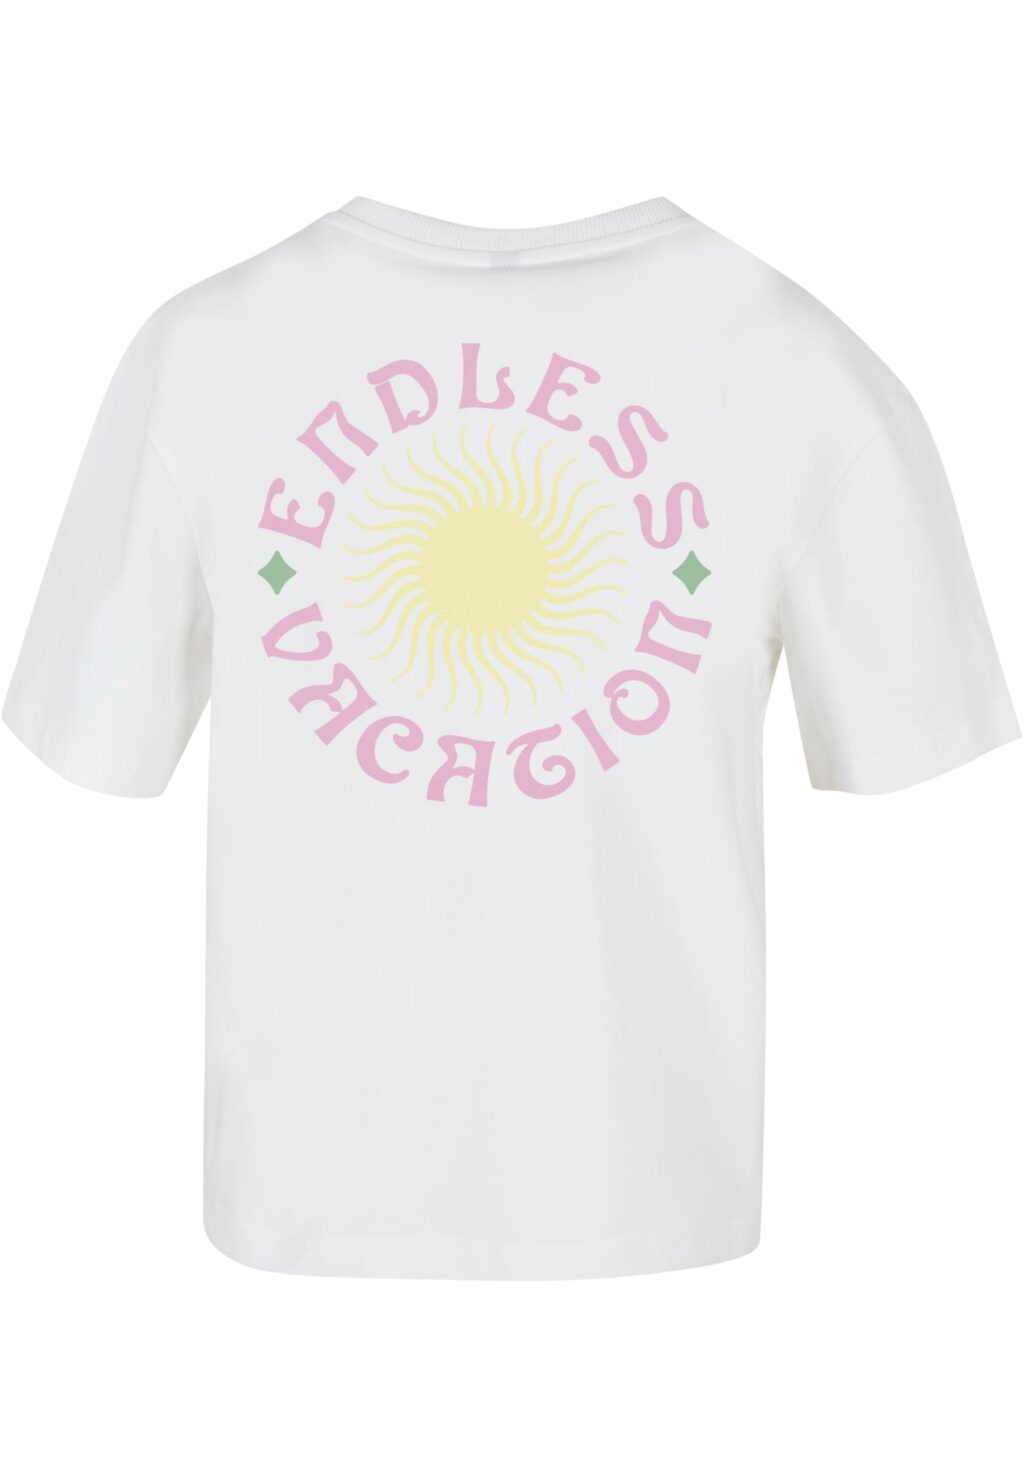 Ladies Endless Vacation Tee white BE010